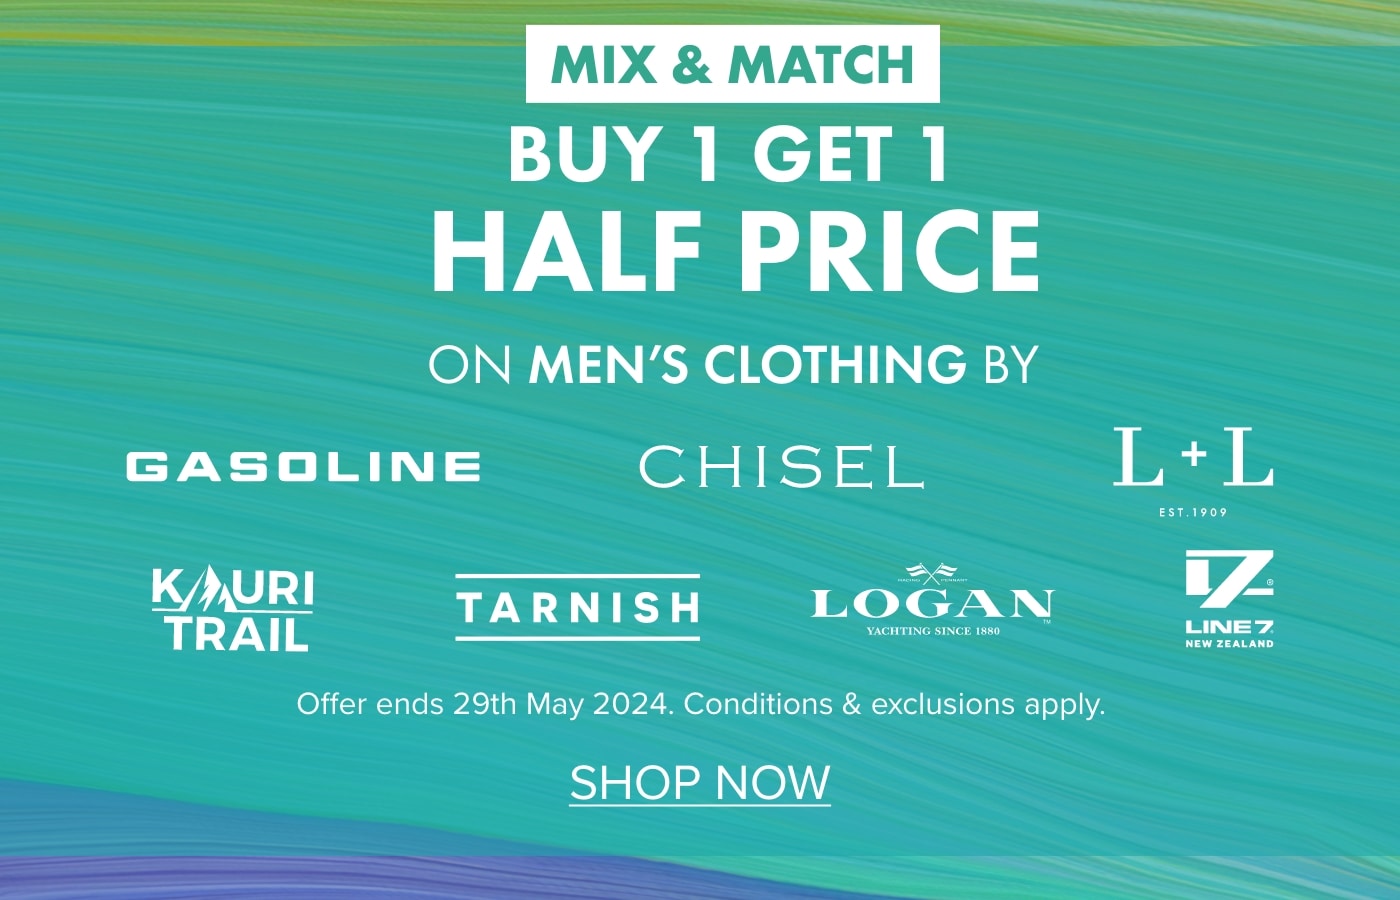 Buy 1 Get 1 Half Price on Men's Clothing by Gasoline, Chisel, L+L Casual, Kauri Trail, Tarnish, Line 7, Logan & more